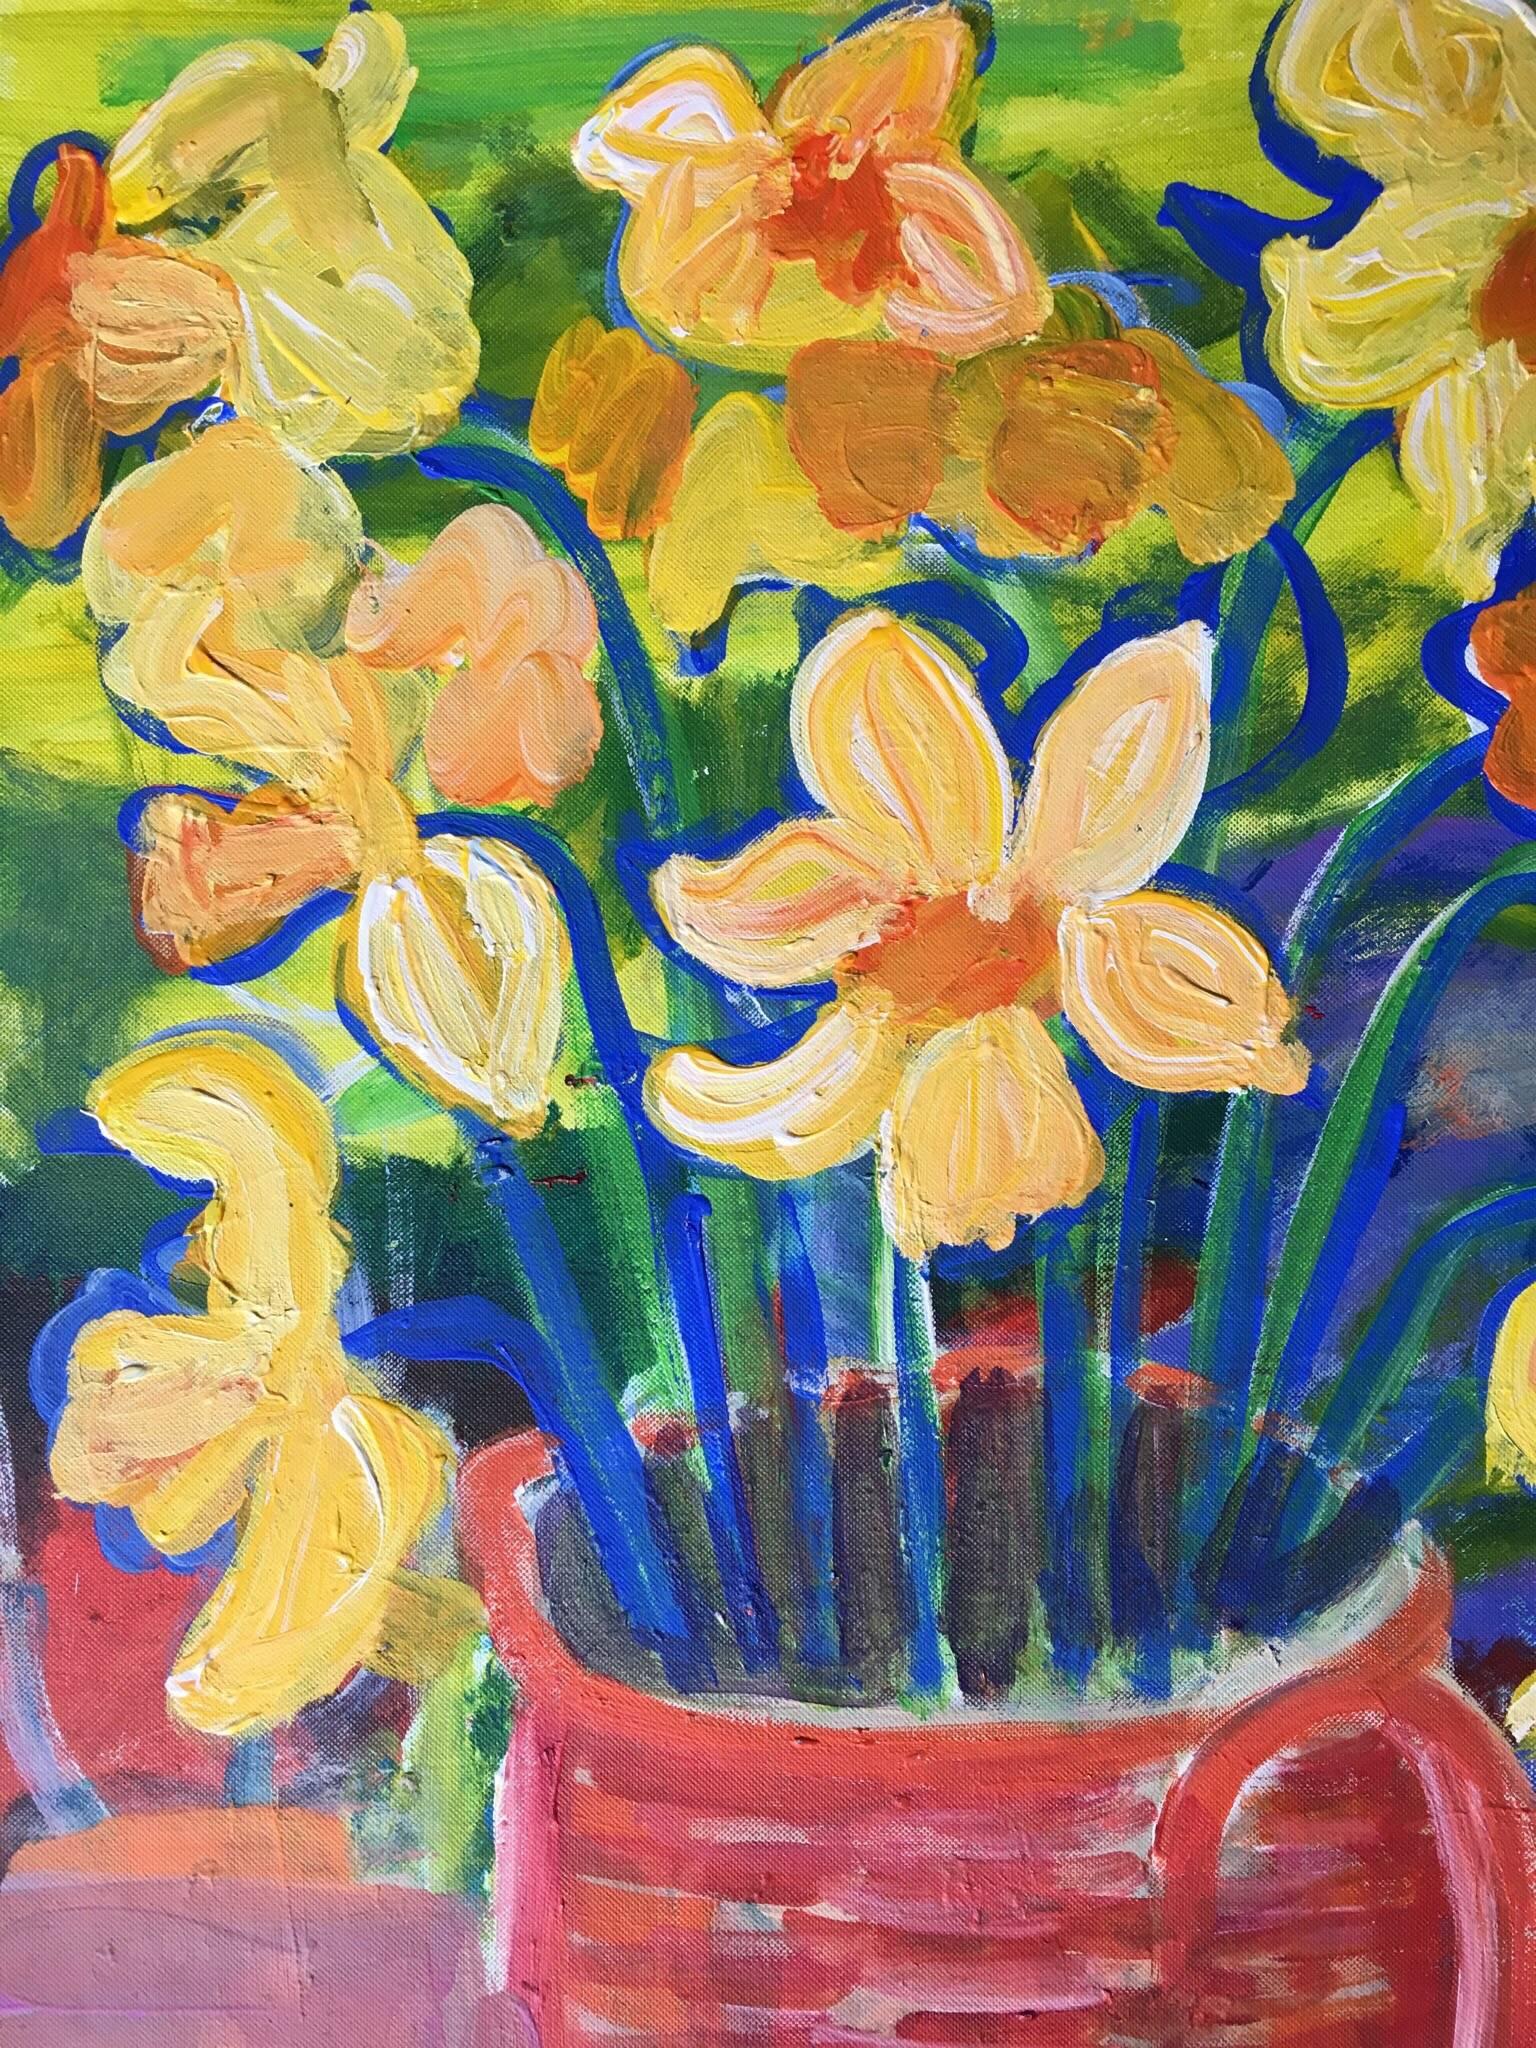 Daffodils, Impressionist, Bright Colours, Oil Painting
by Pamela Cawley, British 20th century
oil painting on board, unframed
board: 18 x 14 inches 

Stunning original Impressionist oil painting by the 20th century British artist, Pamela Cawley. The